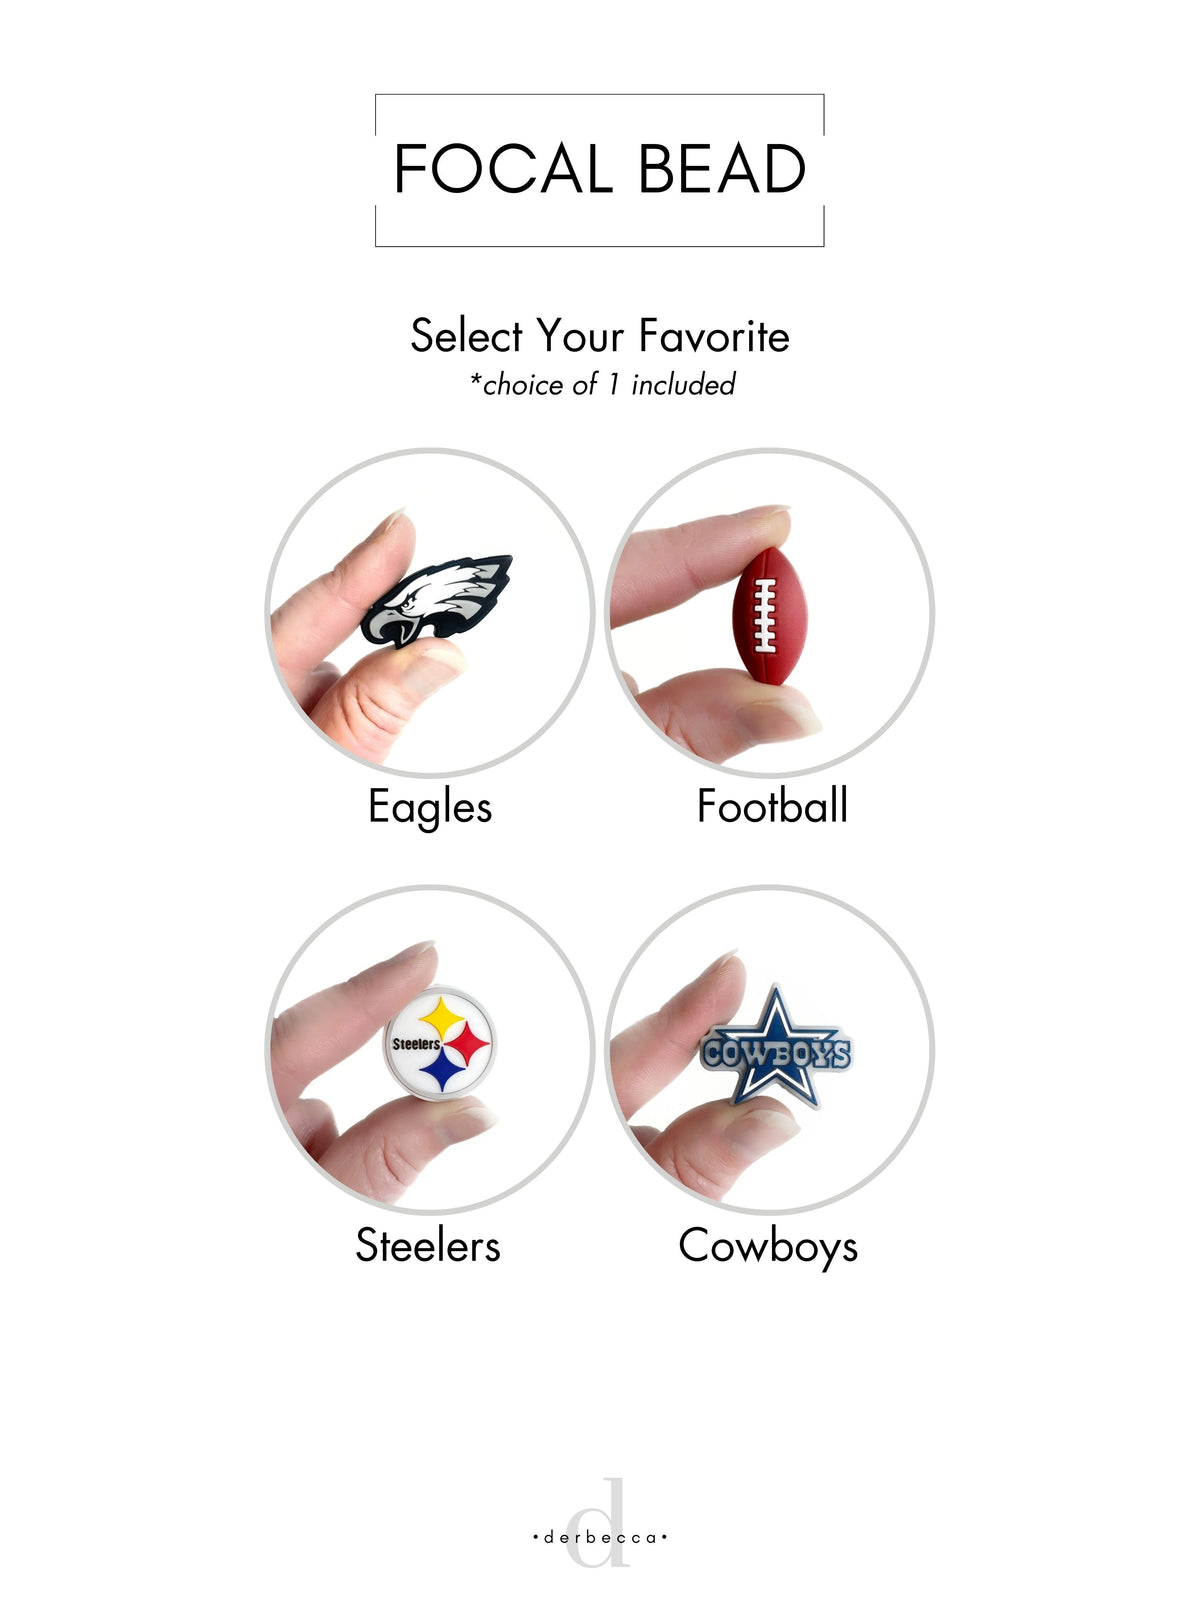 Rubber Bead Sports Teams Football Philly Eagles, Pitt Steelers, Dallas Cowboys, squishy soft beads